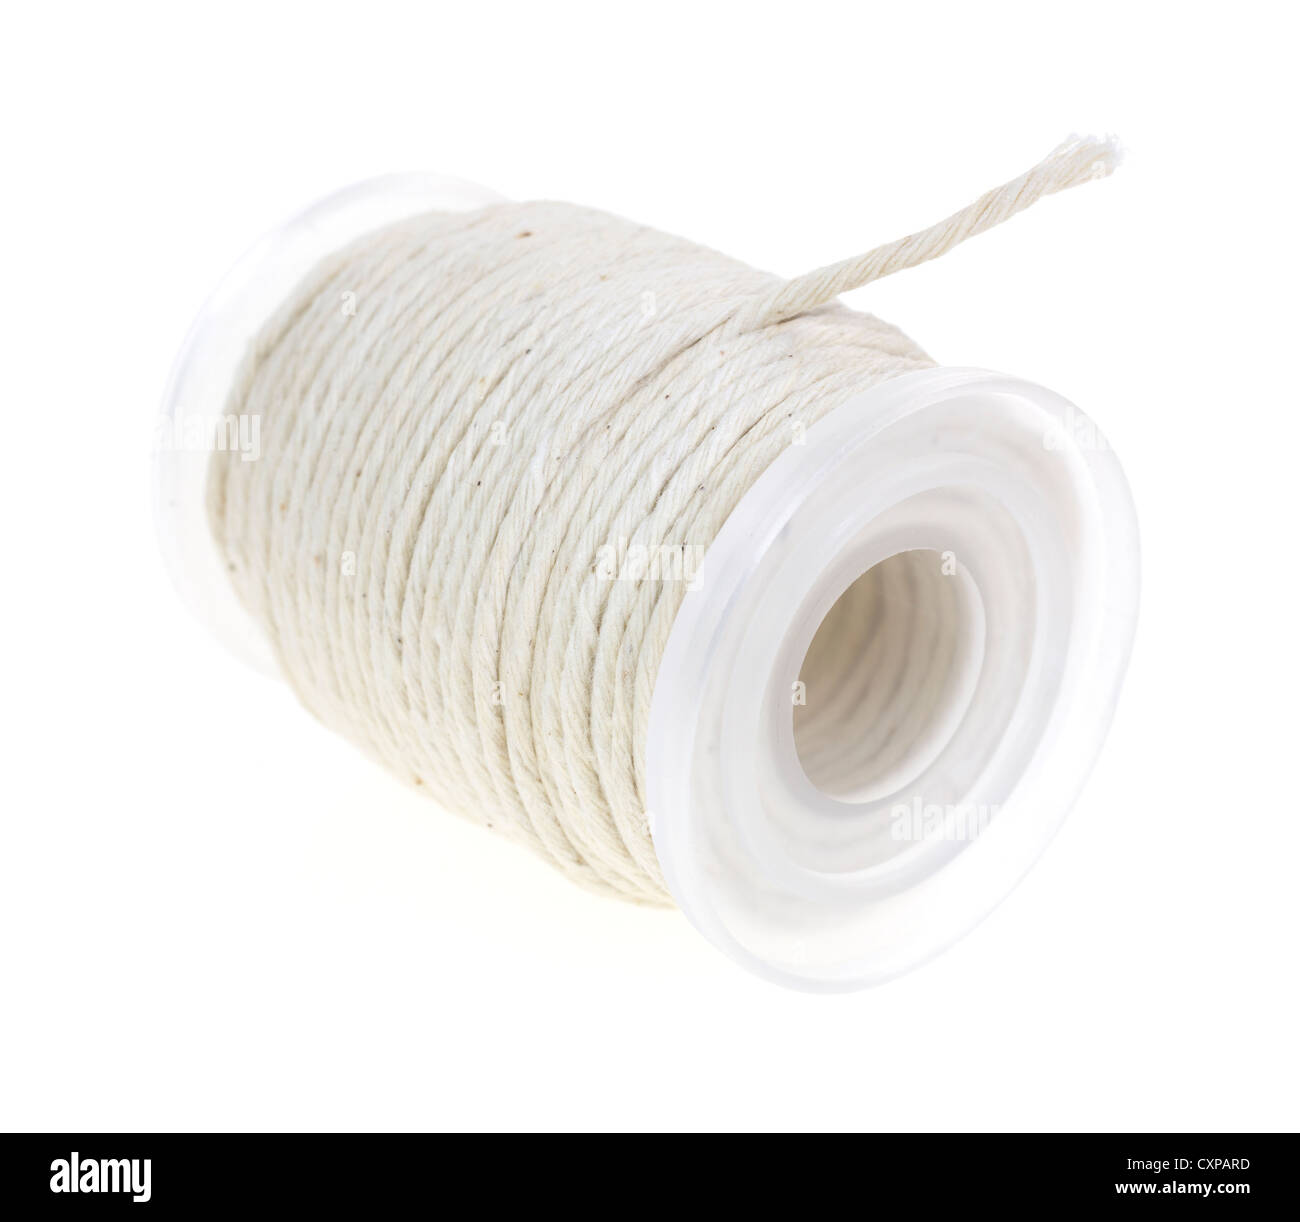 A spindle of new butcher's cotton twine on a white background. Stock Photo